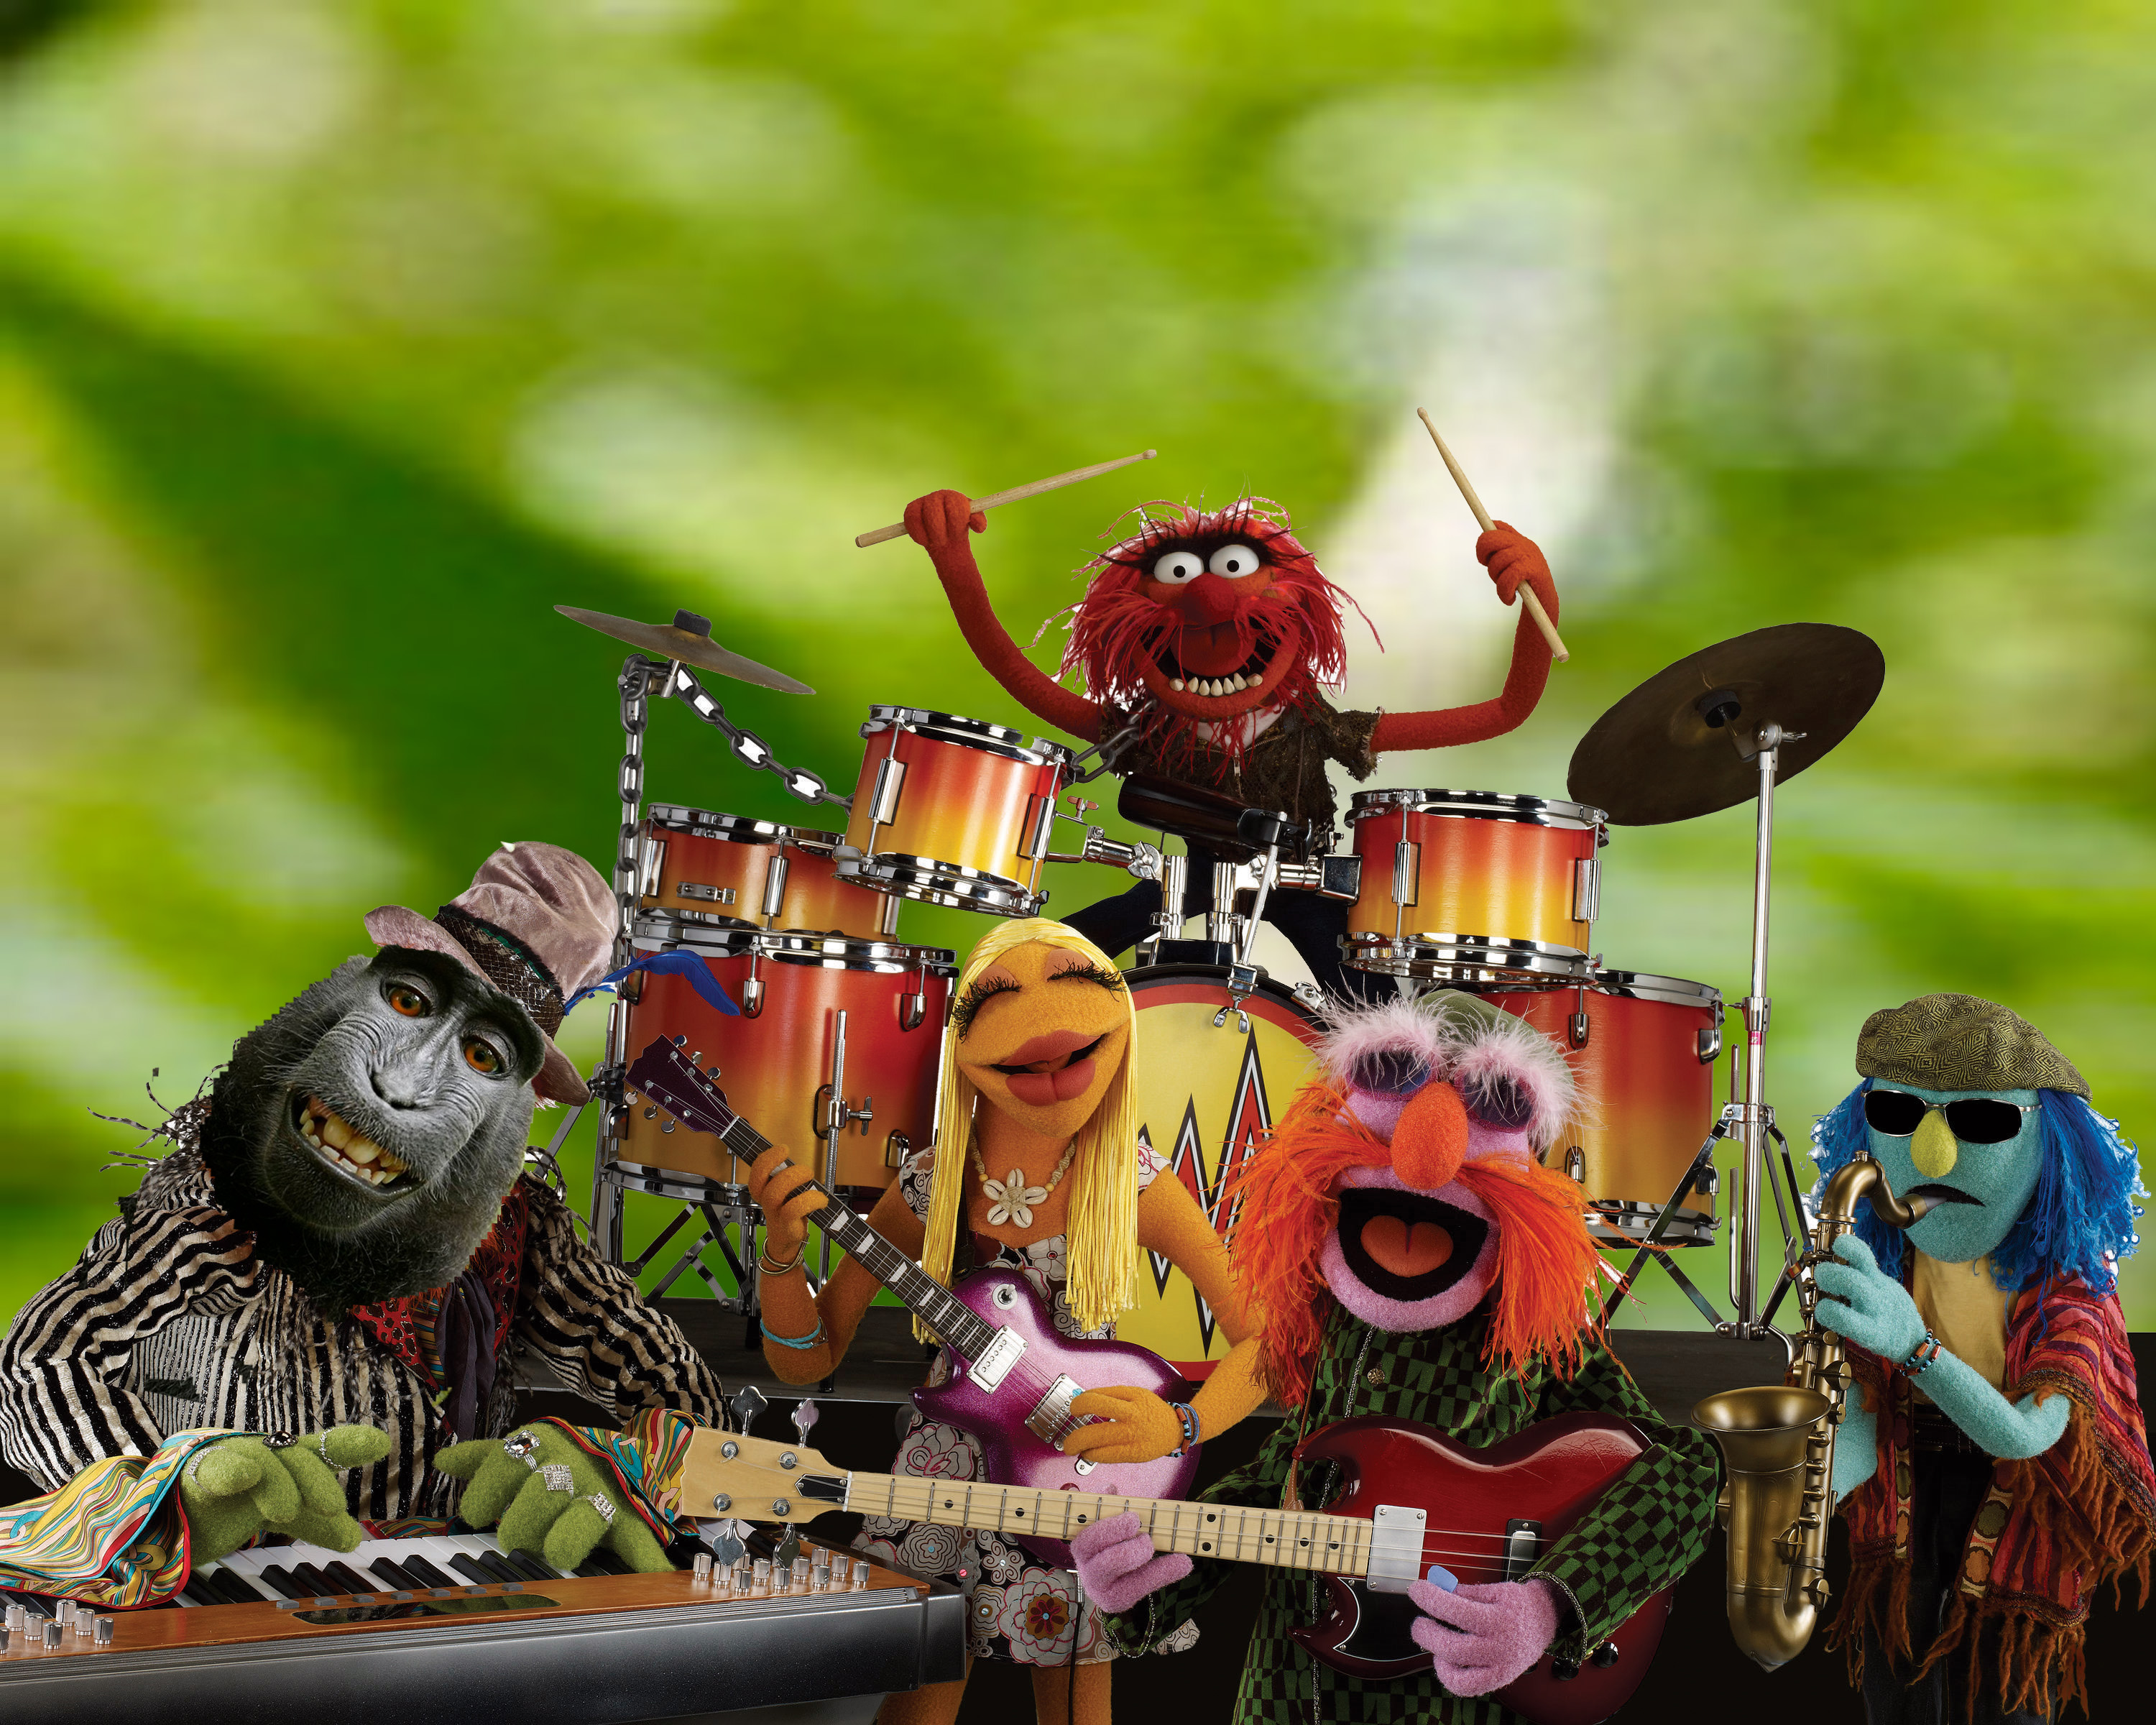 Macaque-ter Teeth and the electric Mayhem